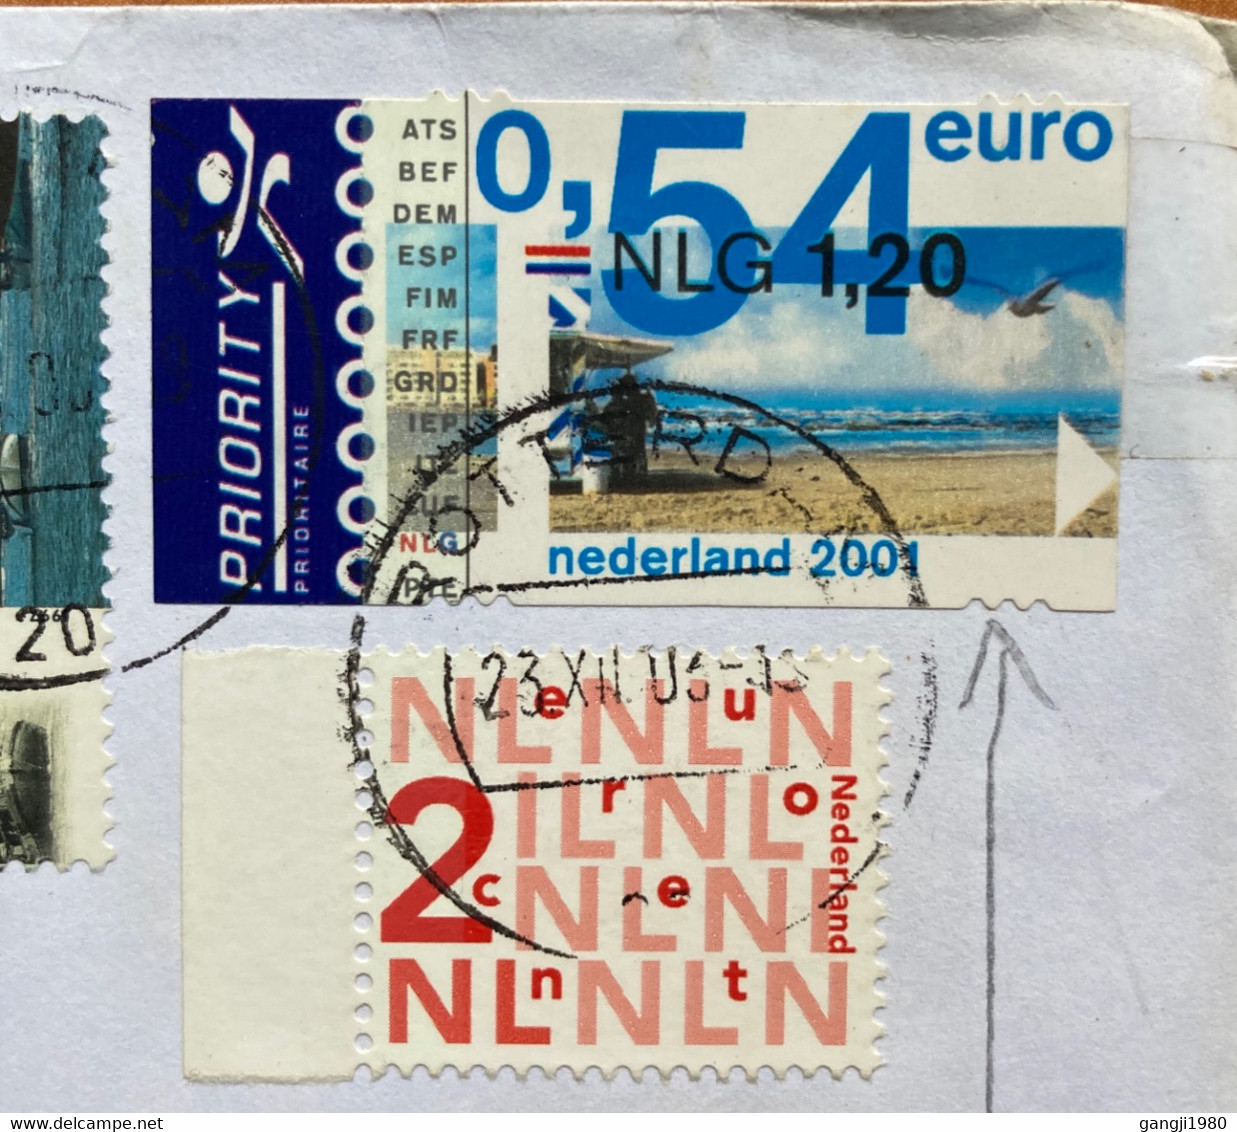 NEDERLAND 2004, PRIORITY SELF-ADHESIVE ATM STAMP ,5 VIEW OF SEA & CITY SHIP COVER TO LITHUANIA - Storia Postale